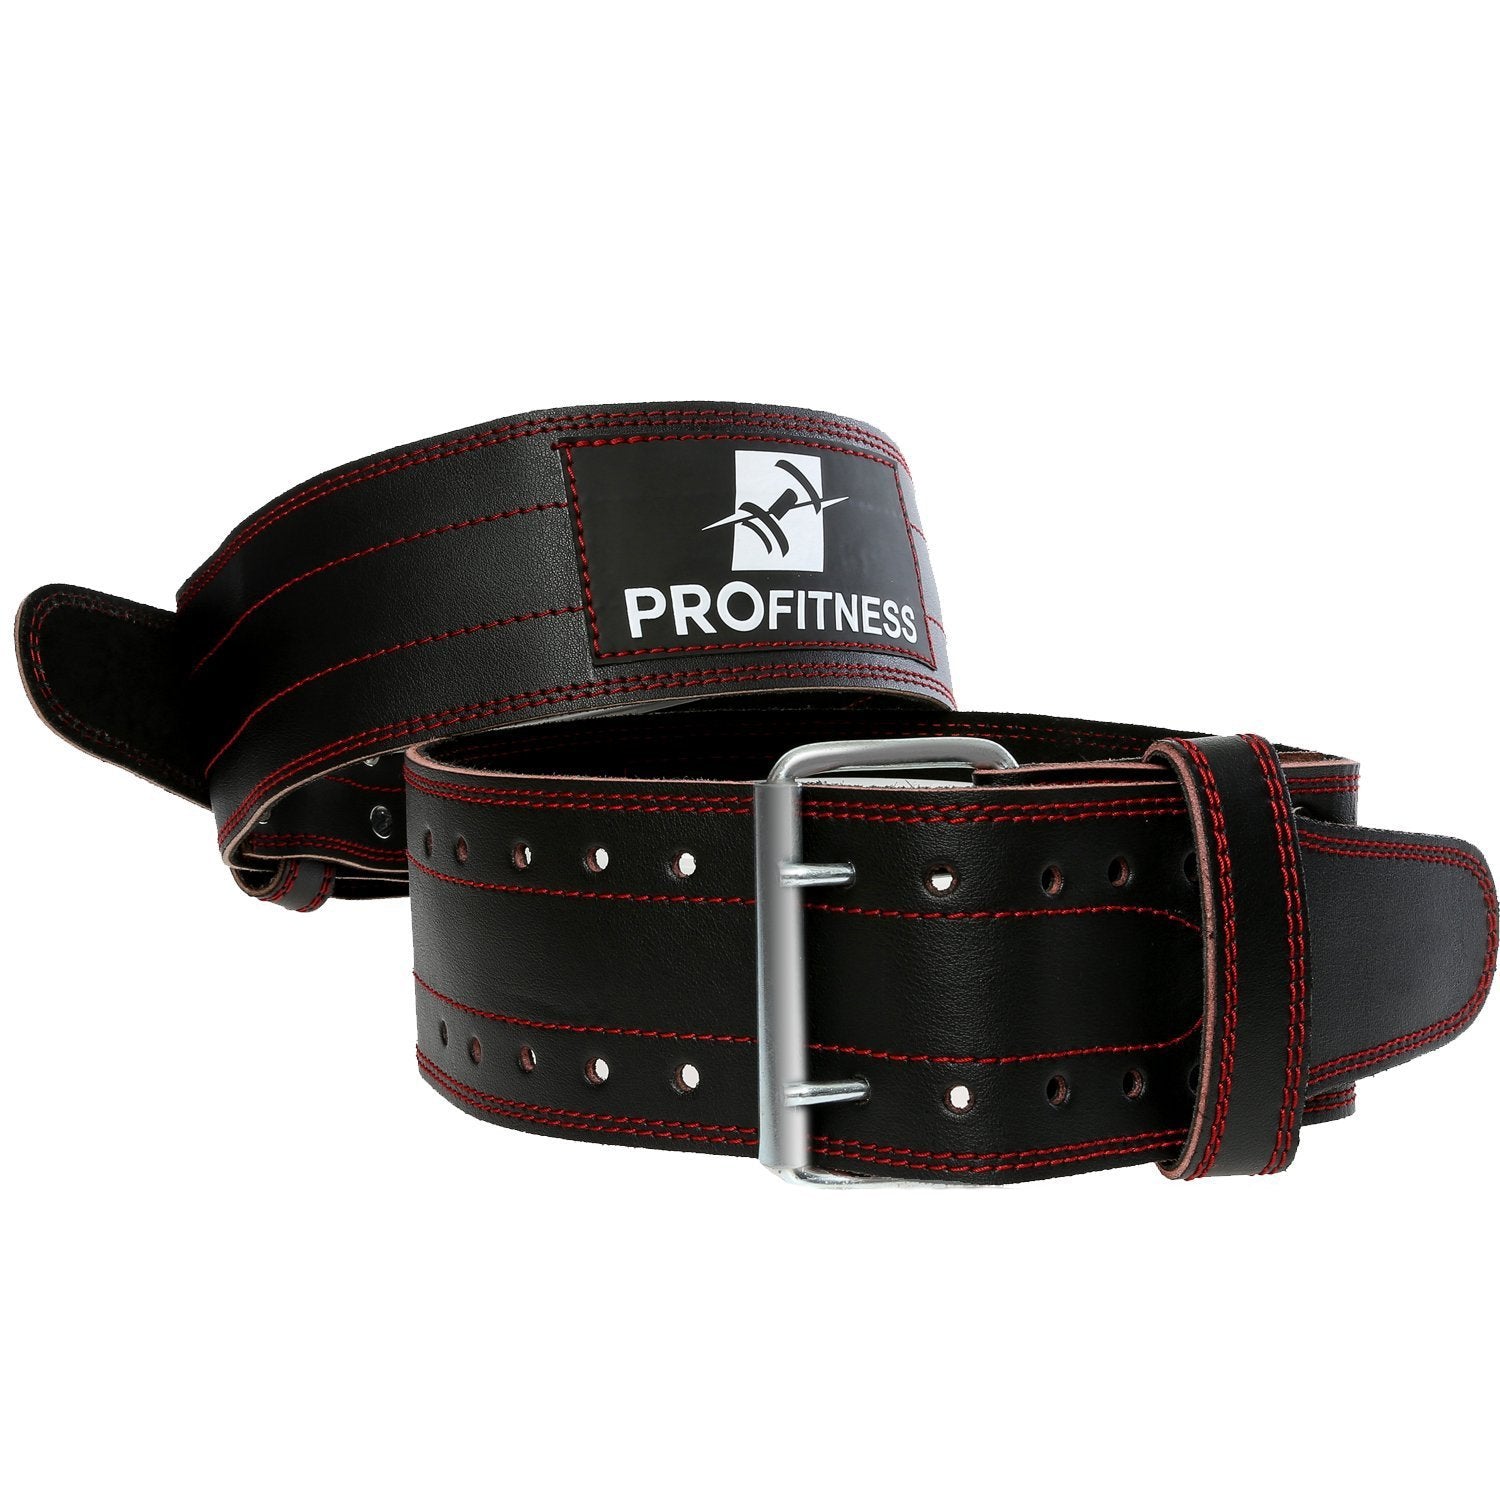 Style 816 - Men's 4 Leather Workout Gym Belt. Clearance, slightly  tarnished. Ergonomically designed for the right support your back needs.